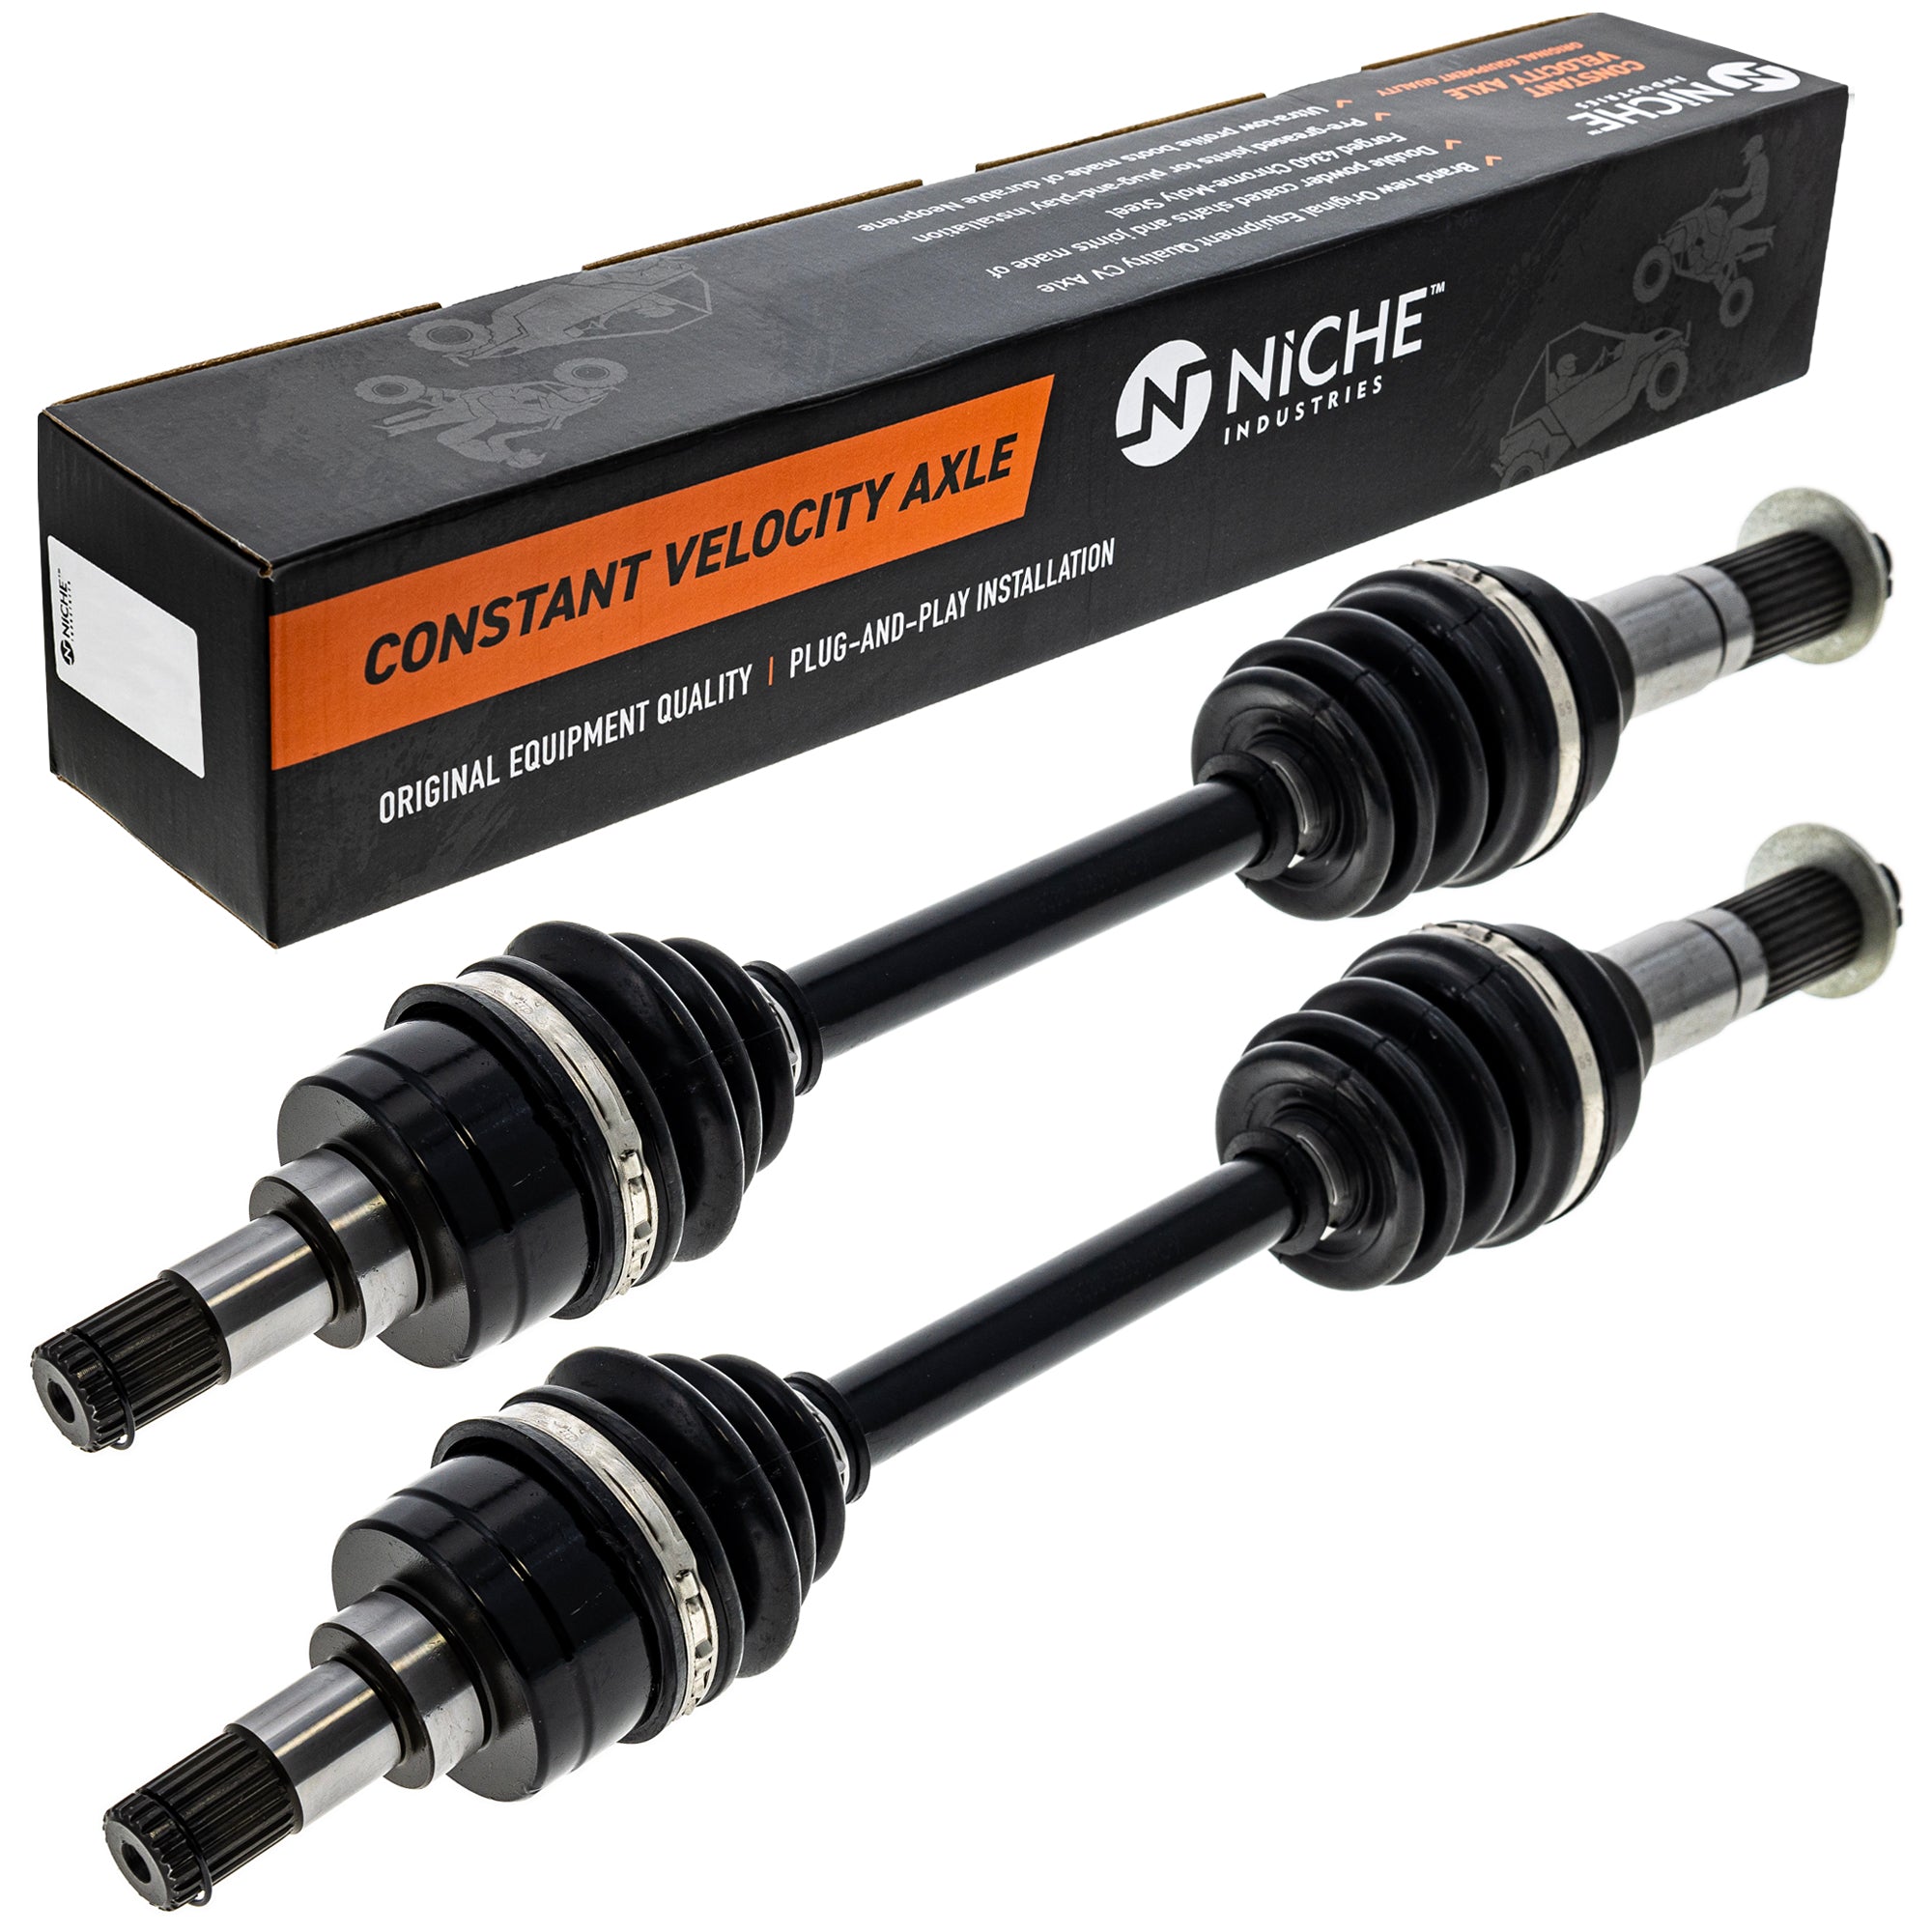 NICHE 519-KCA2423X Axle Parts 2-Pack for